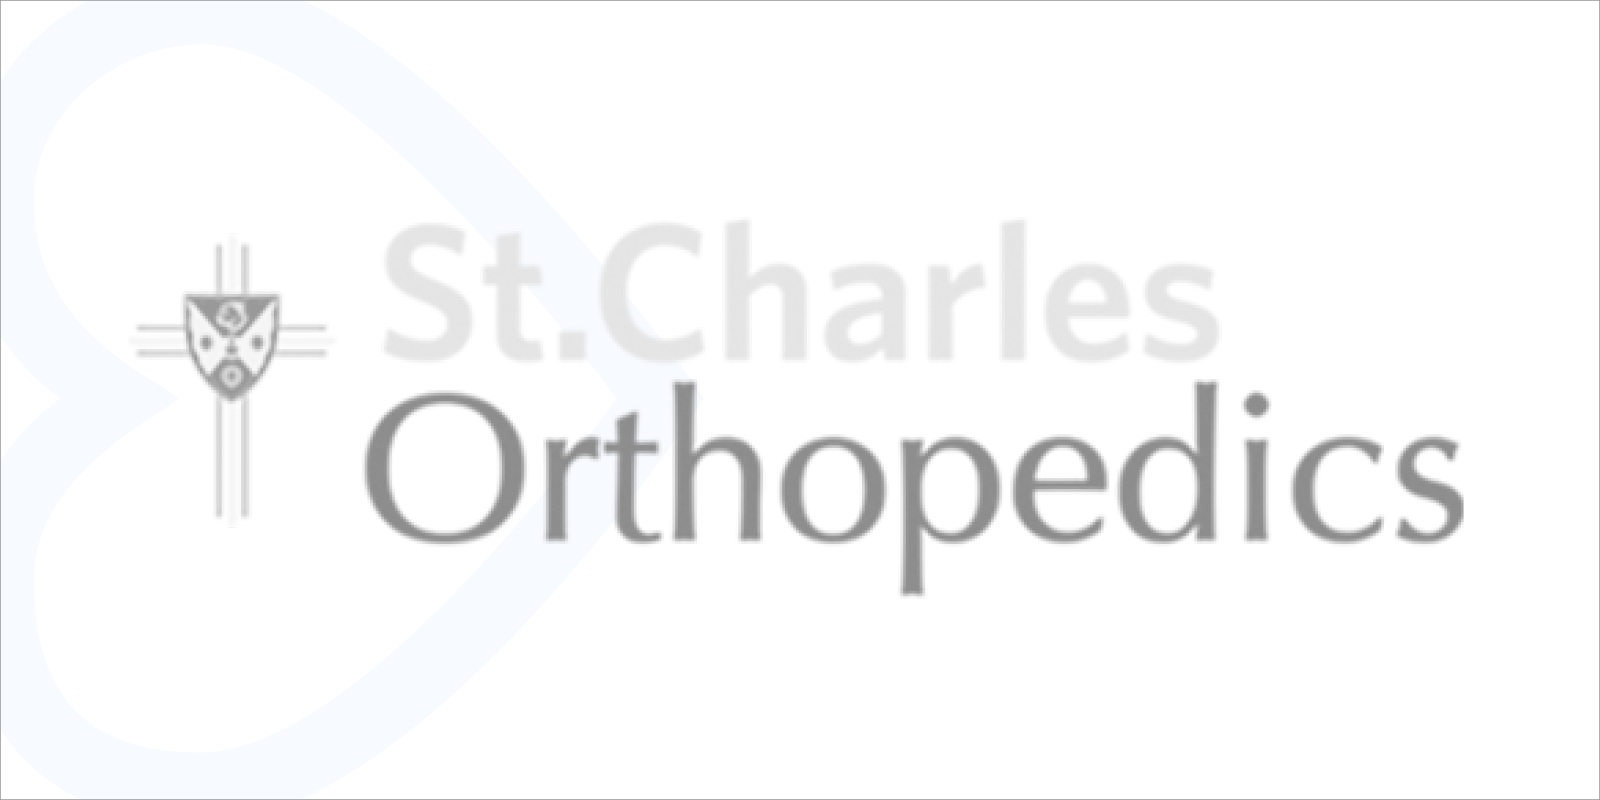 st-charles-orthopaedic-case-study-thumbnail.png